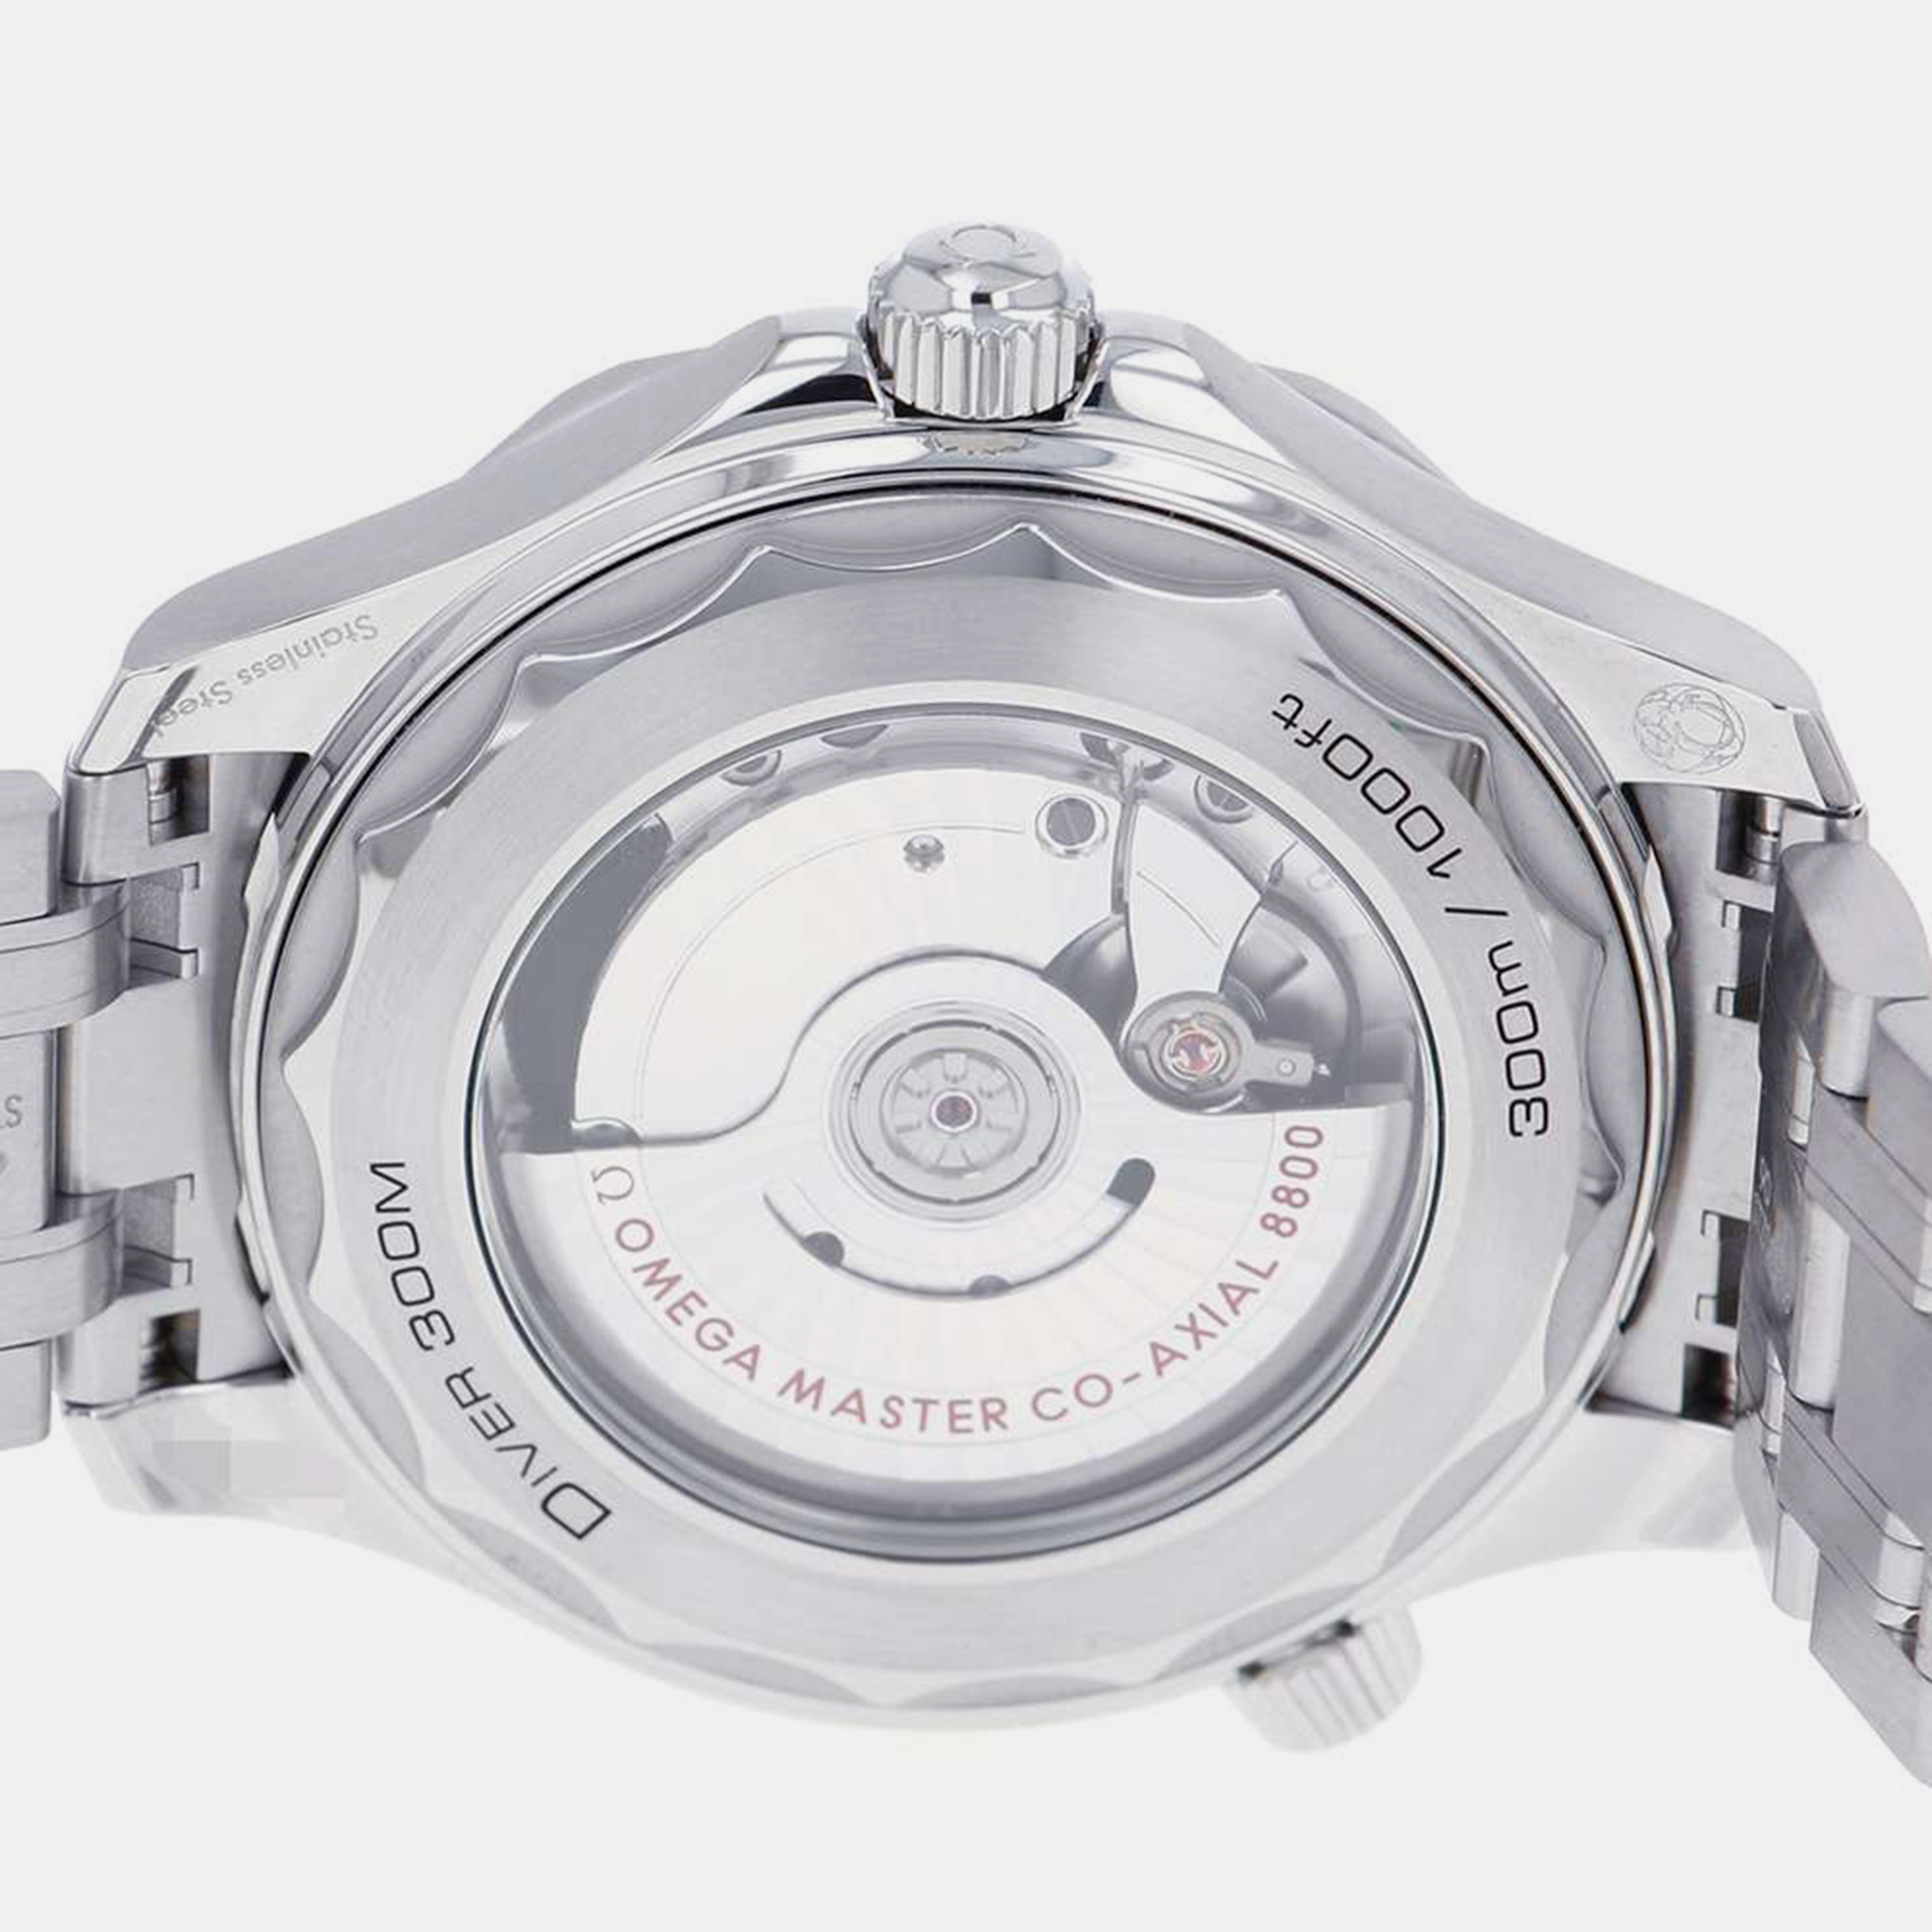 Omega White Stainless Steel Seamaster 210.30.42.20.04.001 Automatic Men's Wristwatch 42 Mm